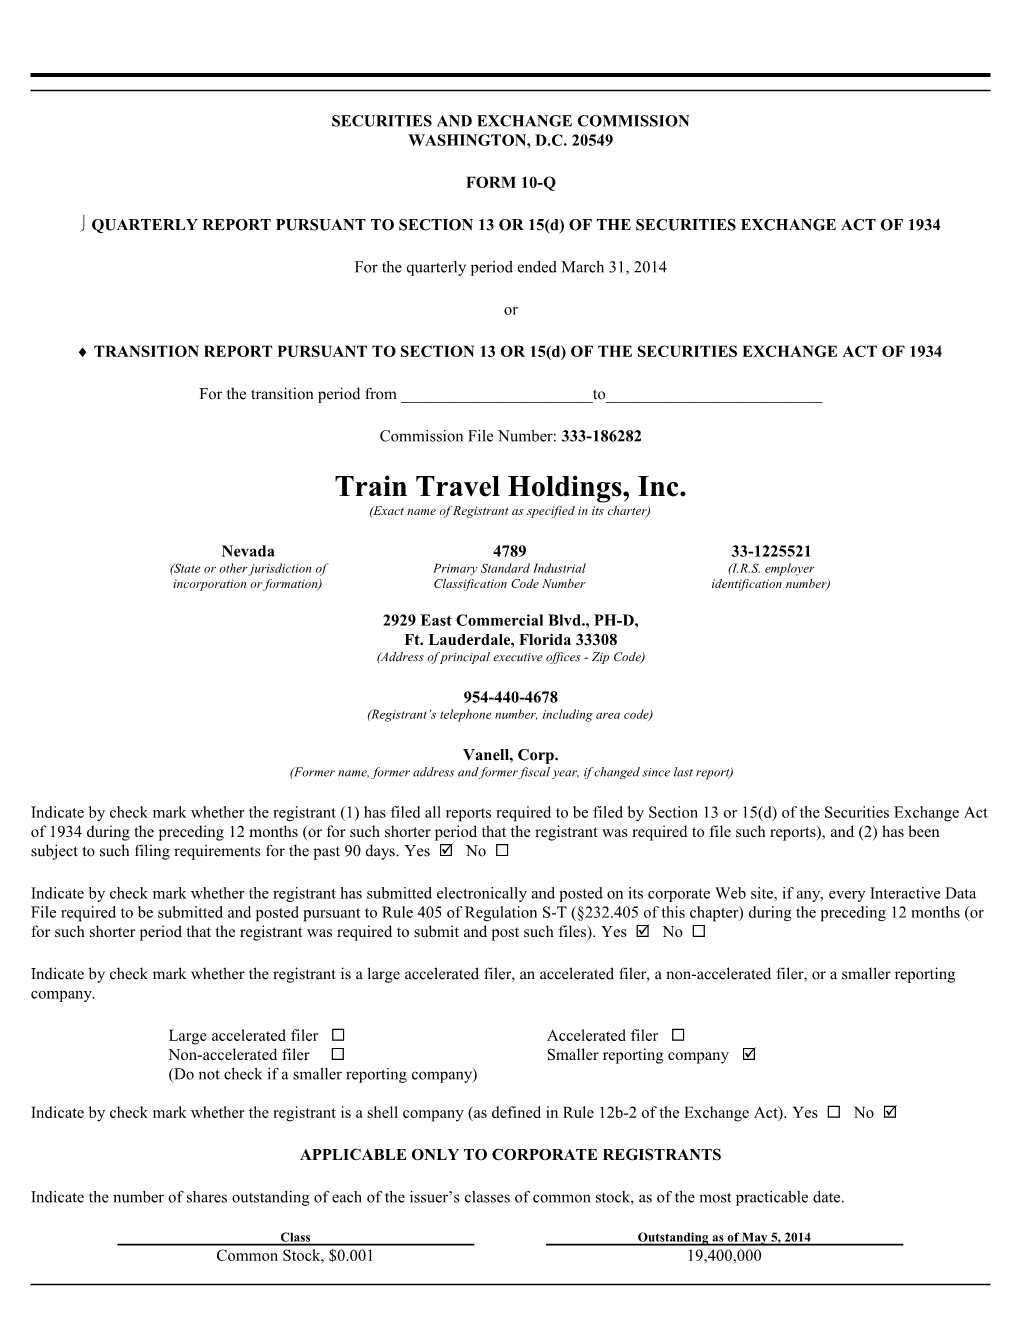 Train Travel Holdings, Inc. (Form: 10-Q, Received: 05/20/2014 12:45:38)